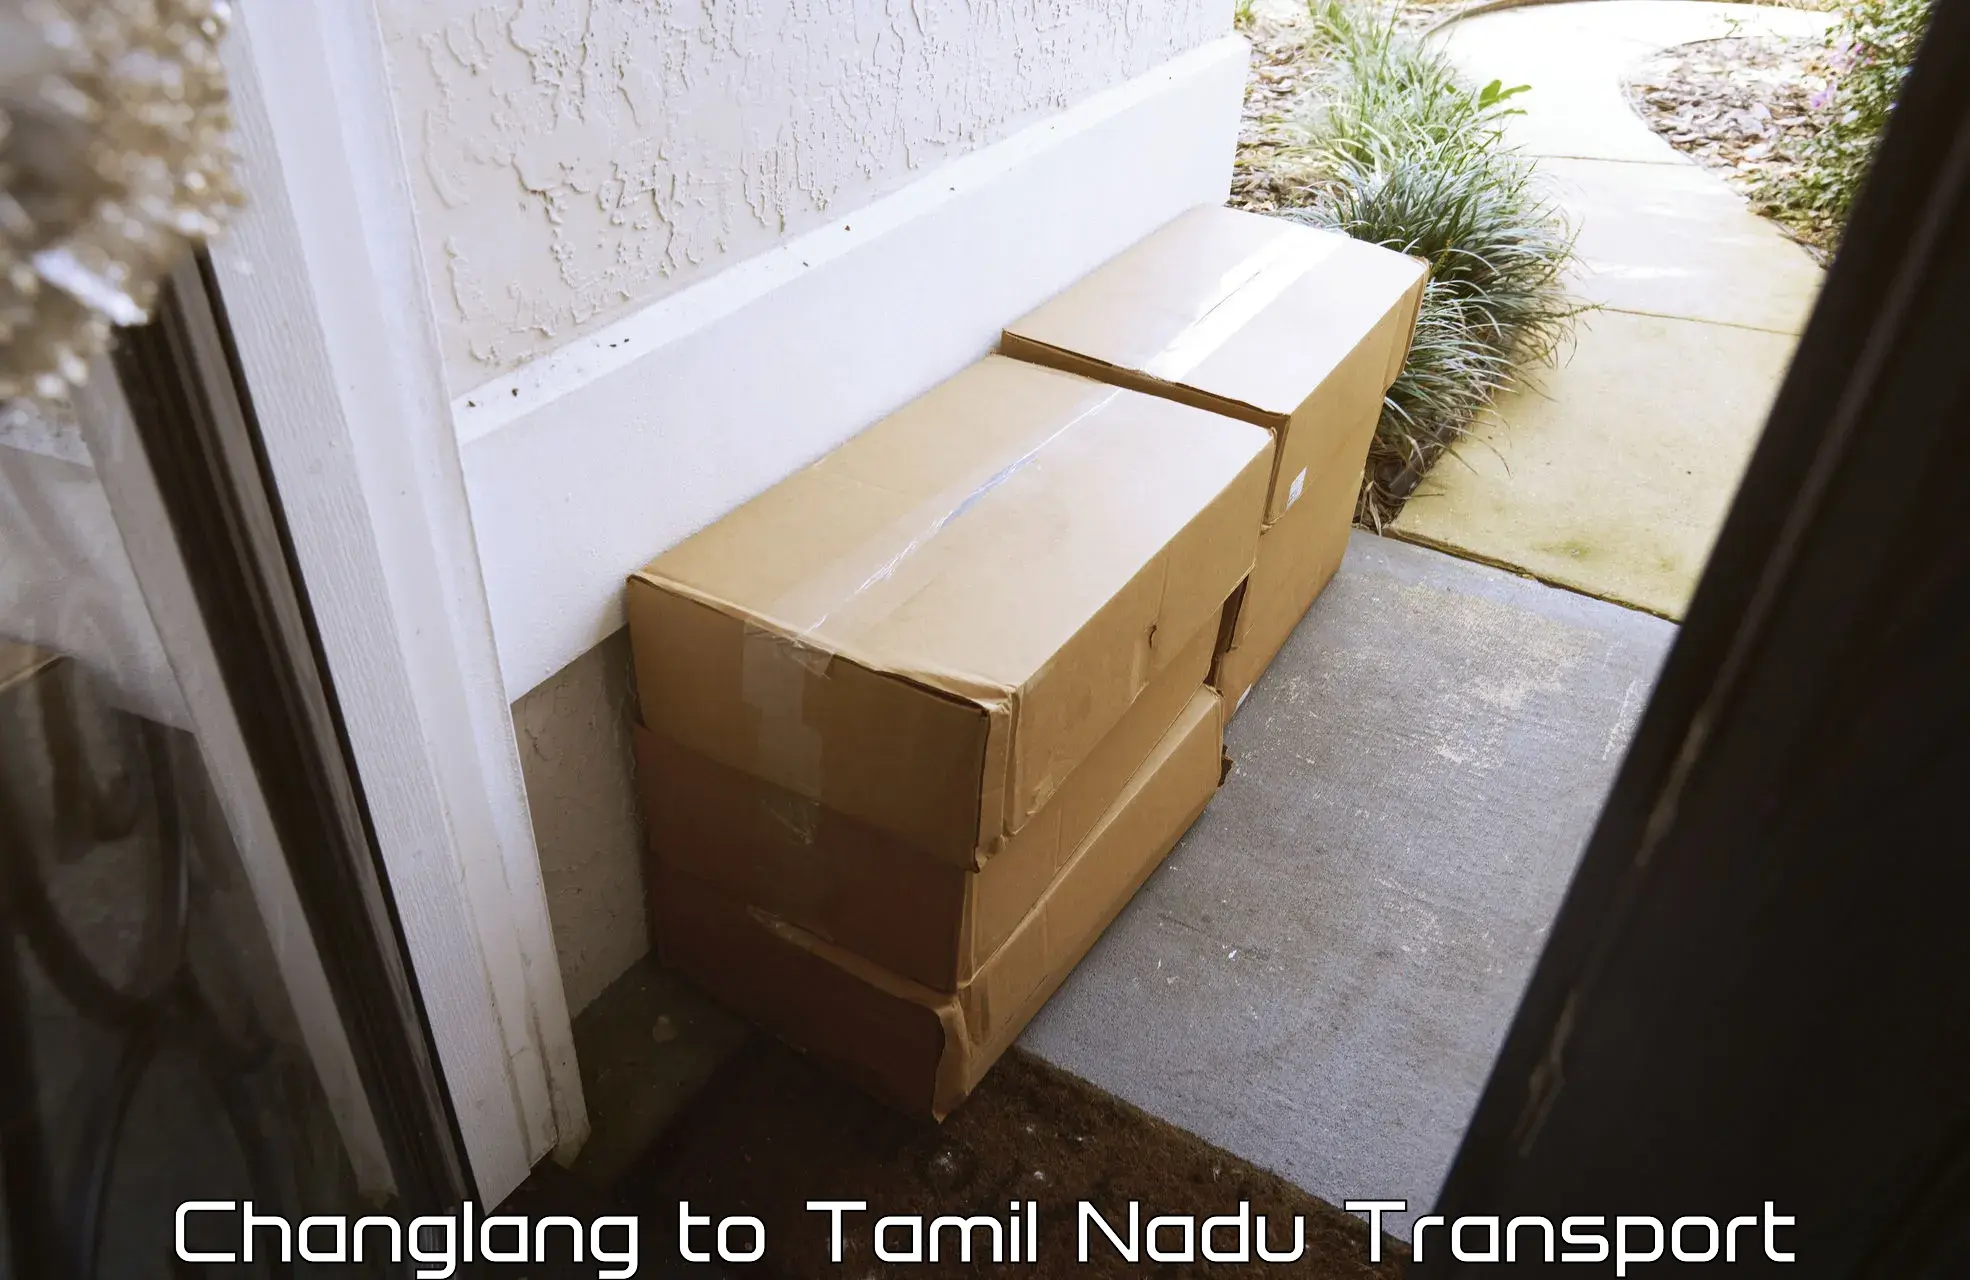 Express transport services Changlang to Tiruchi